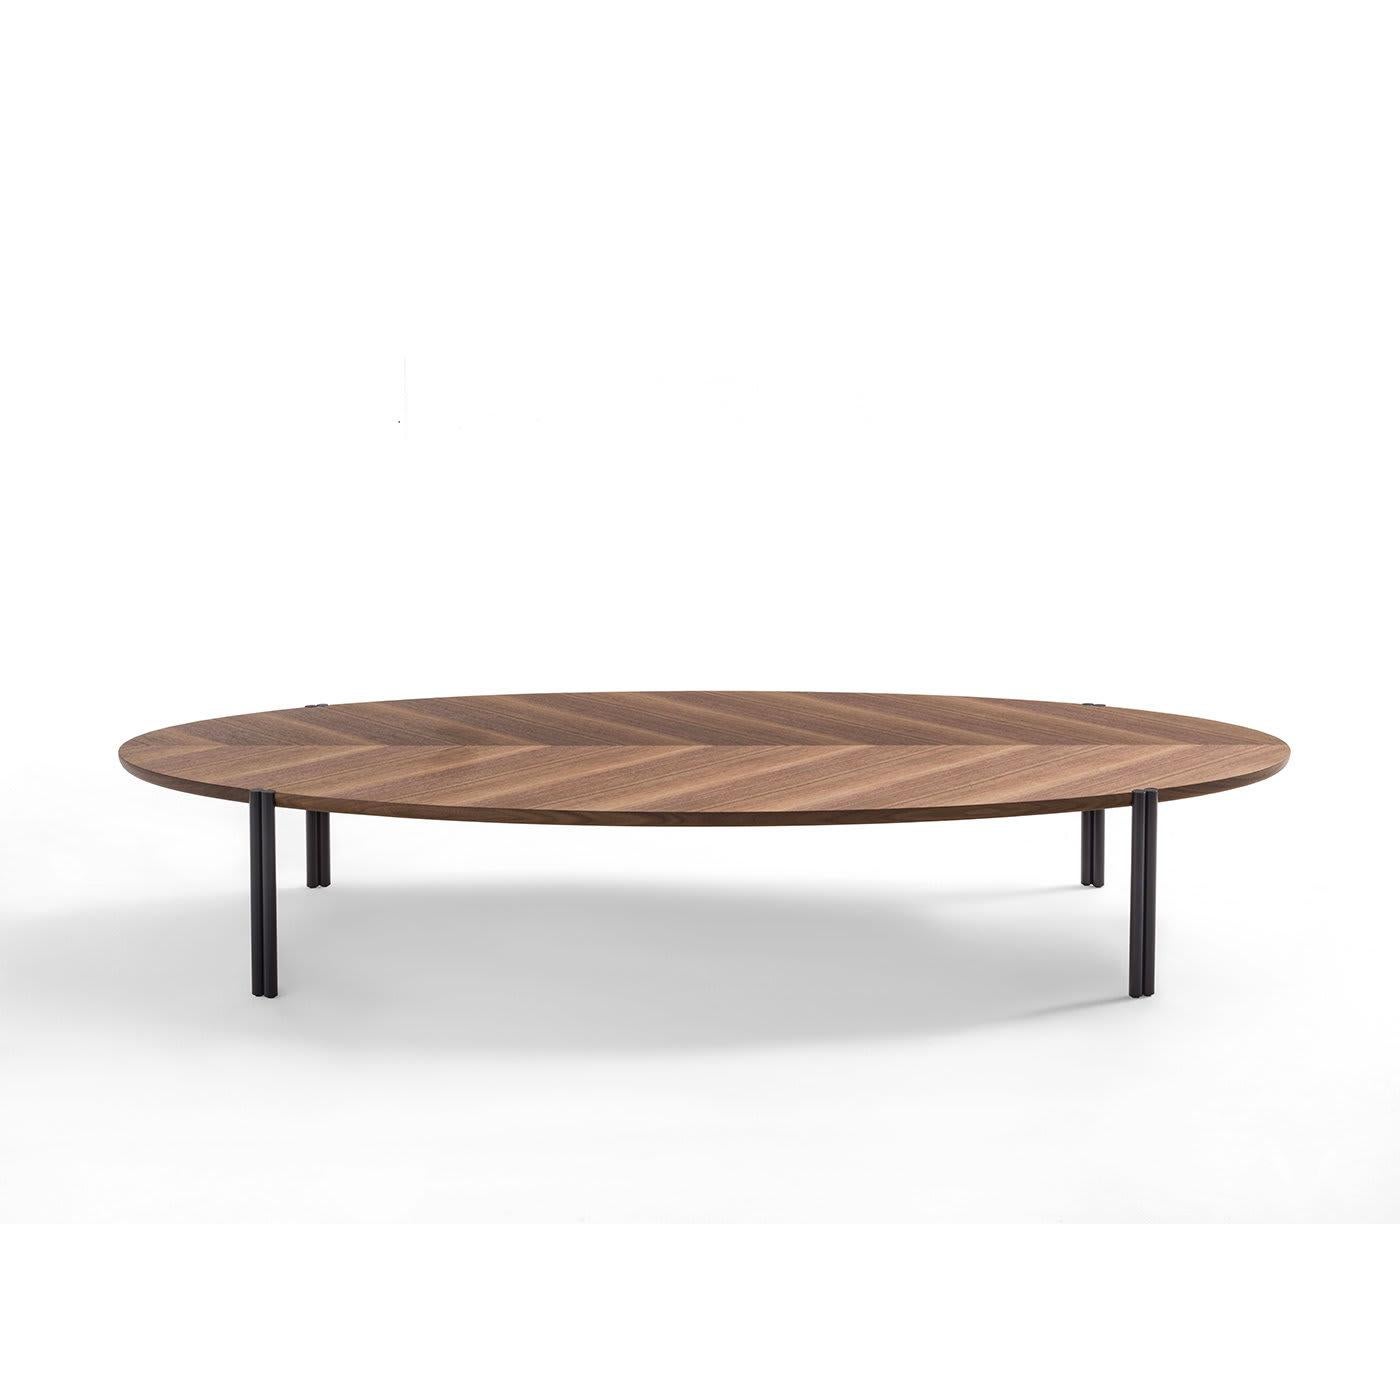 The Jean Ordinary coffee table is simple and stylish in design and will perfectly adapt to any environment, with either classic or modern decor. Crafted from wood, the top is available in Canaletto walnut or black ashwood, with the legs